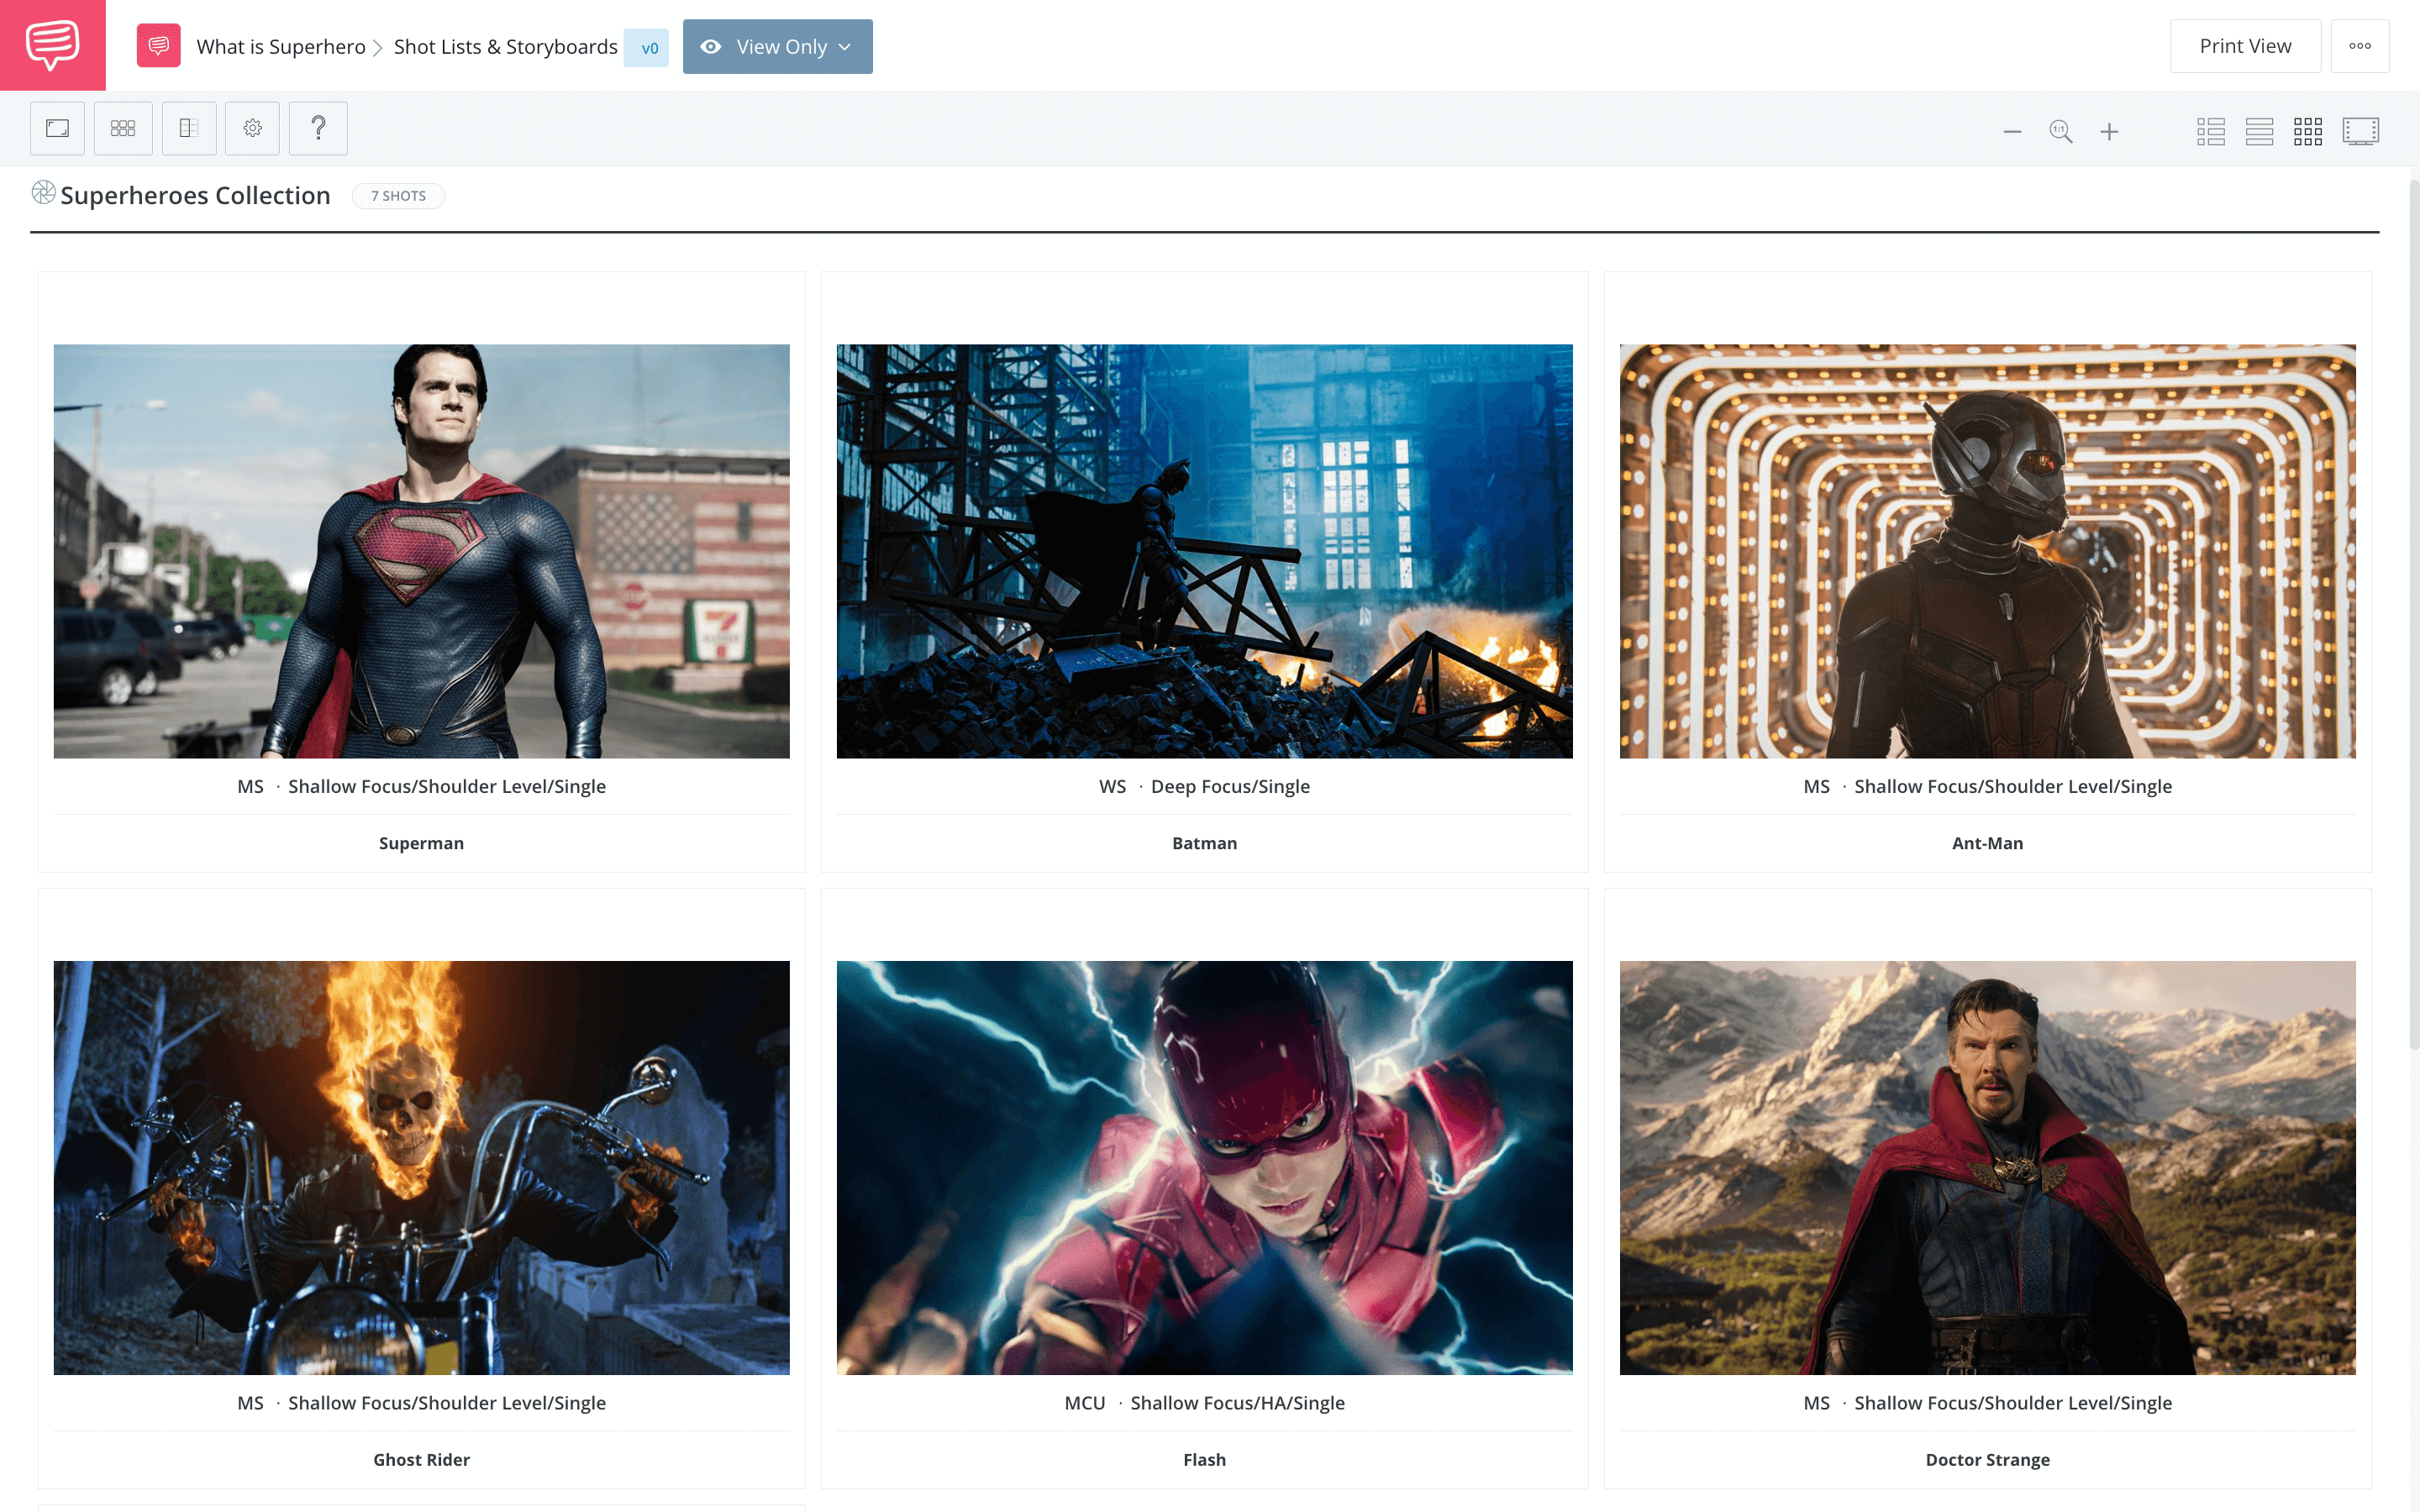 What is a Superhero Superheroes Collection StudioBinder Shot Listing Software